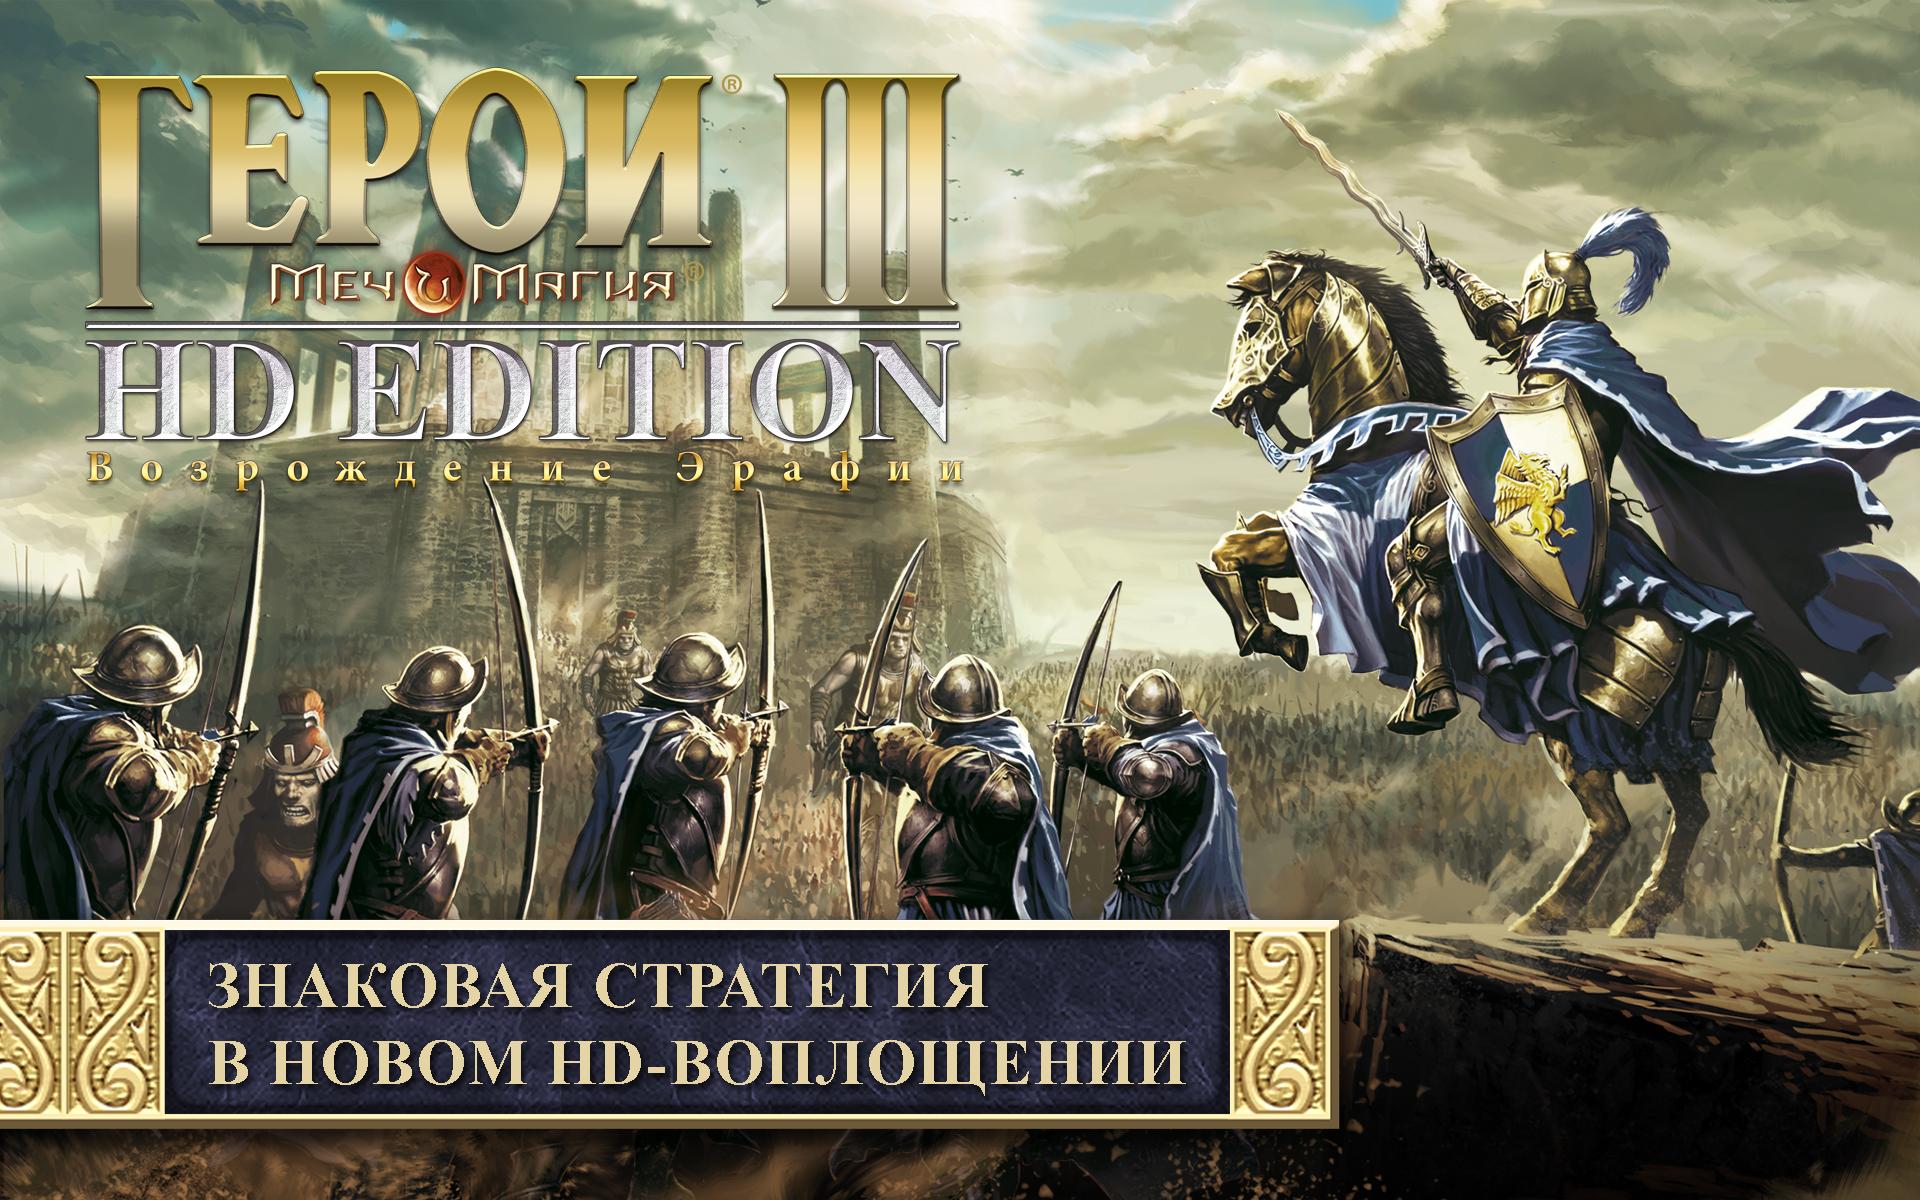 Android application Heroes of Might &amp; Magic III HD screenshort